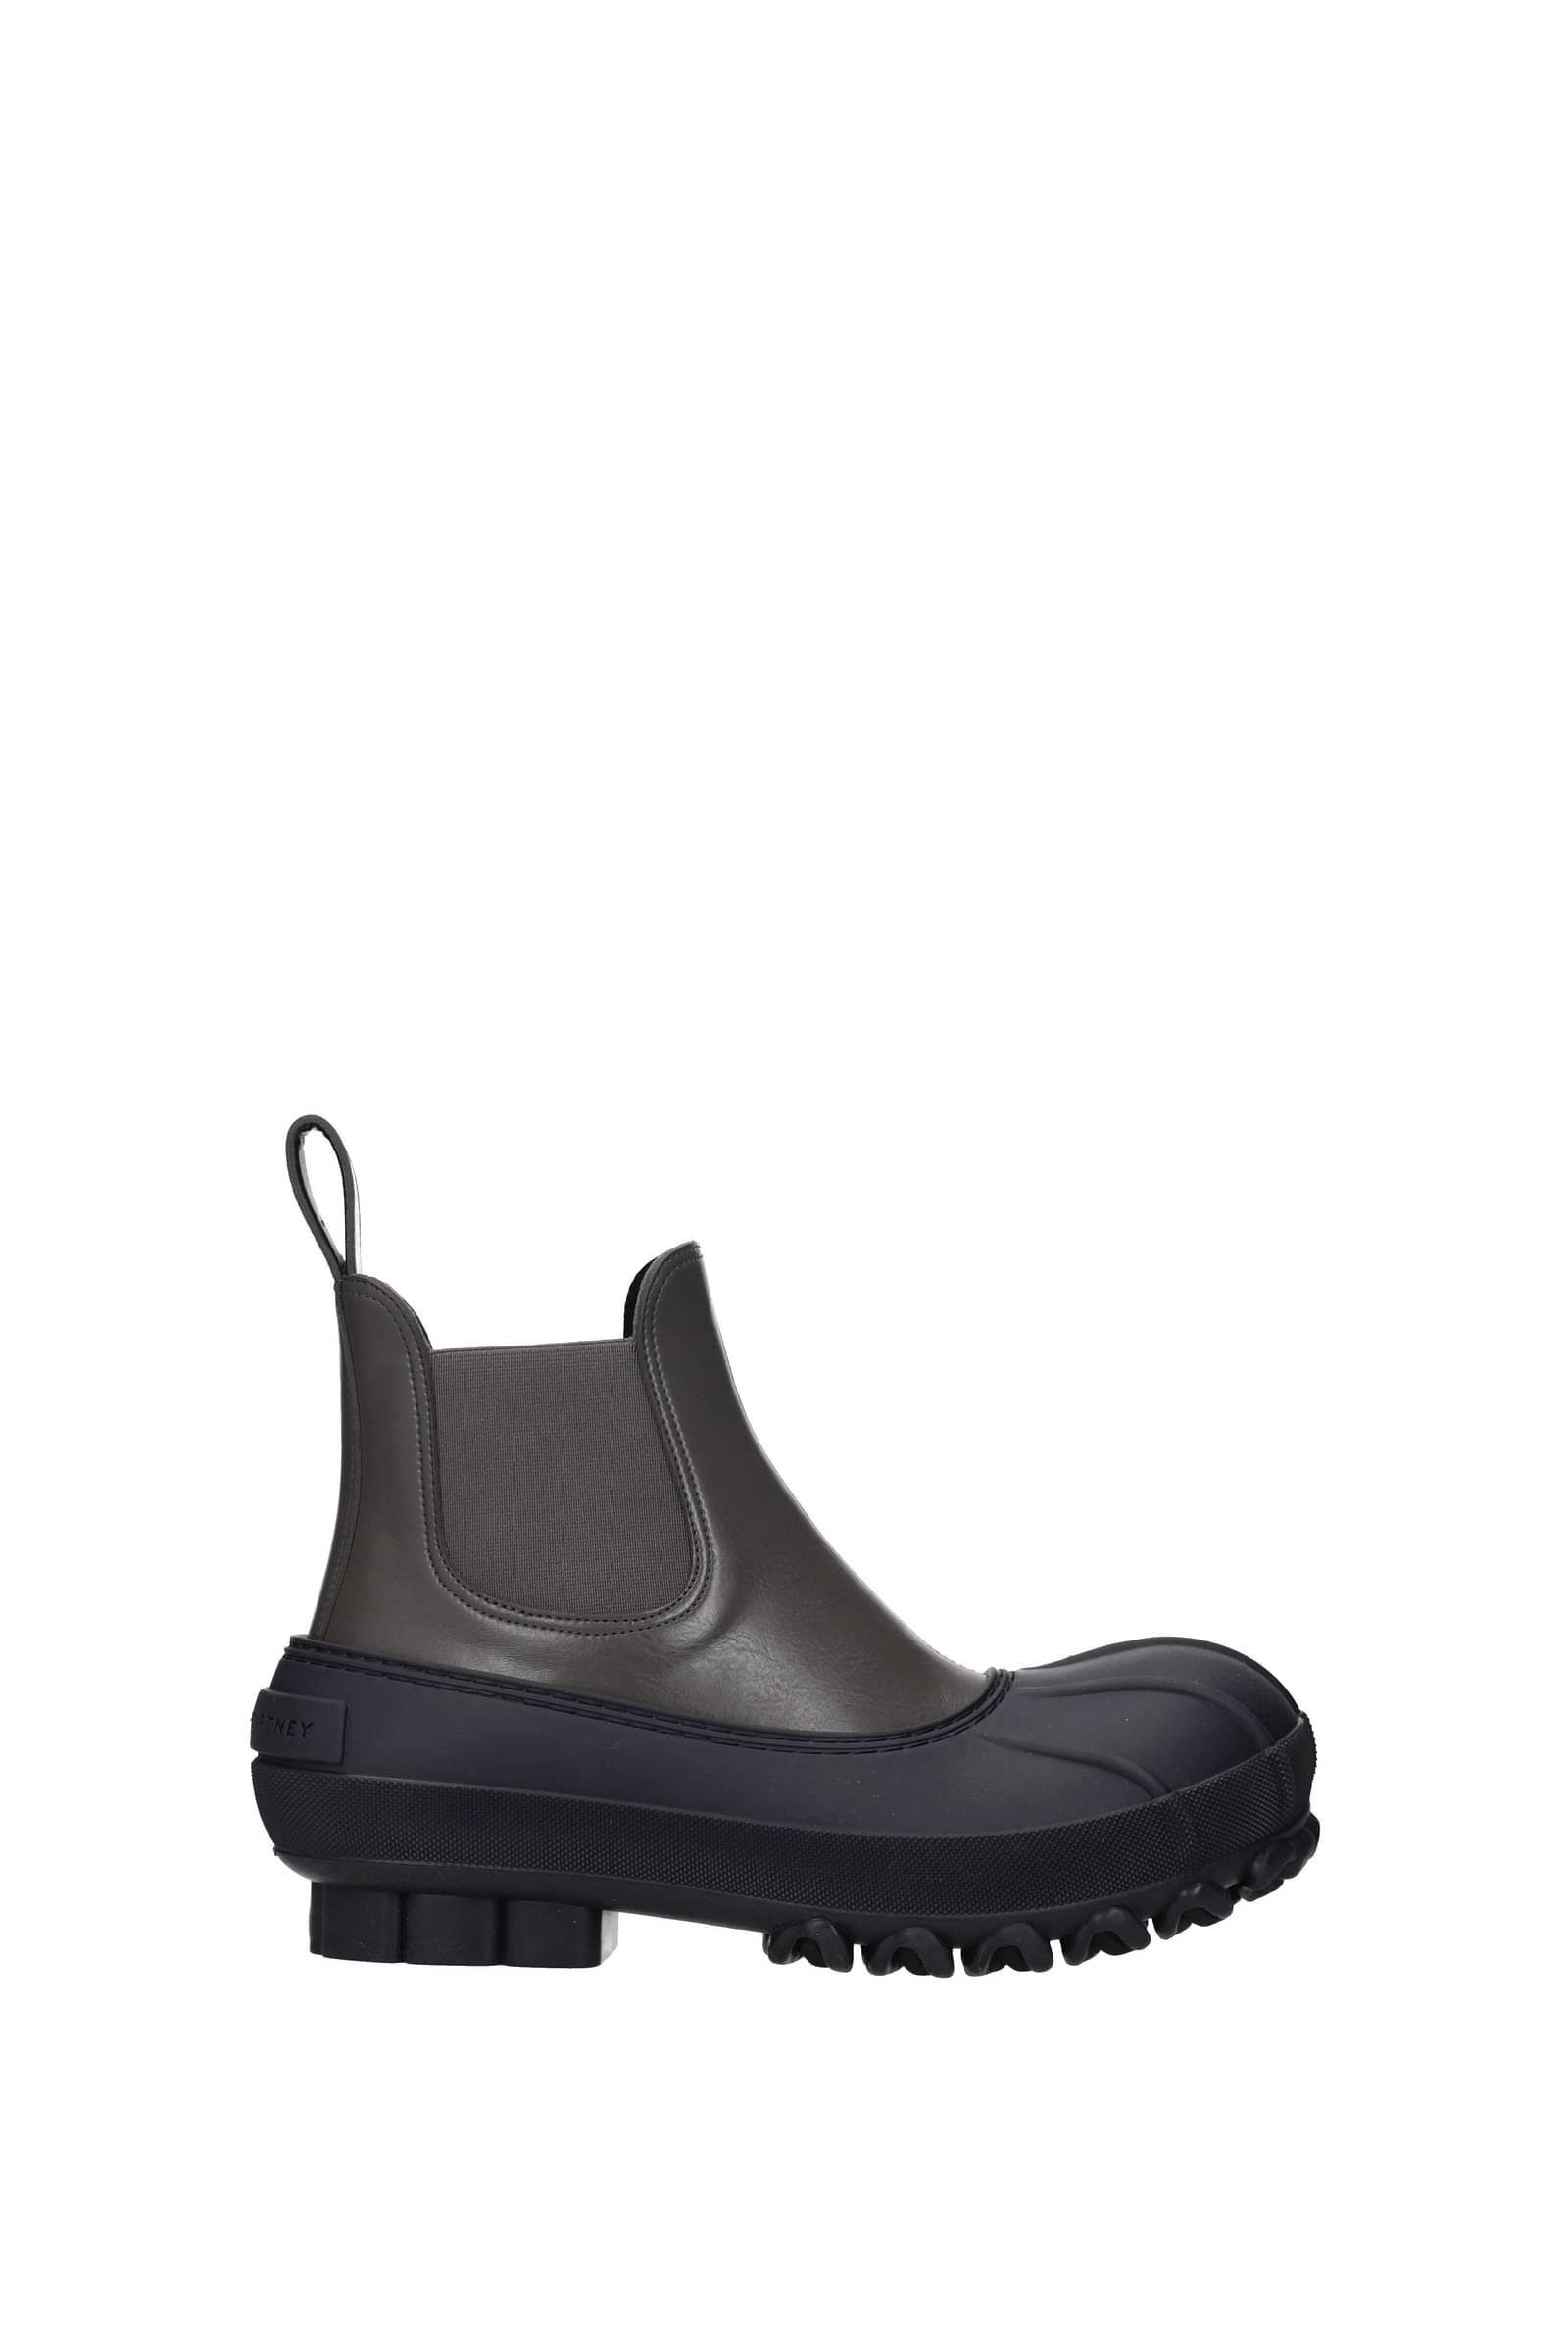 Stella McCartney Ankle boots Women Eco Leather Gray